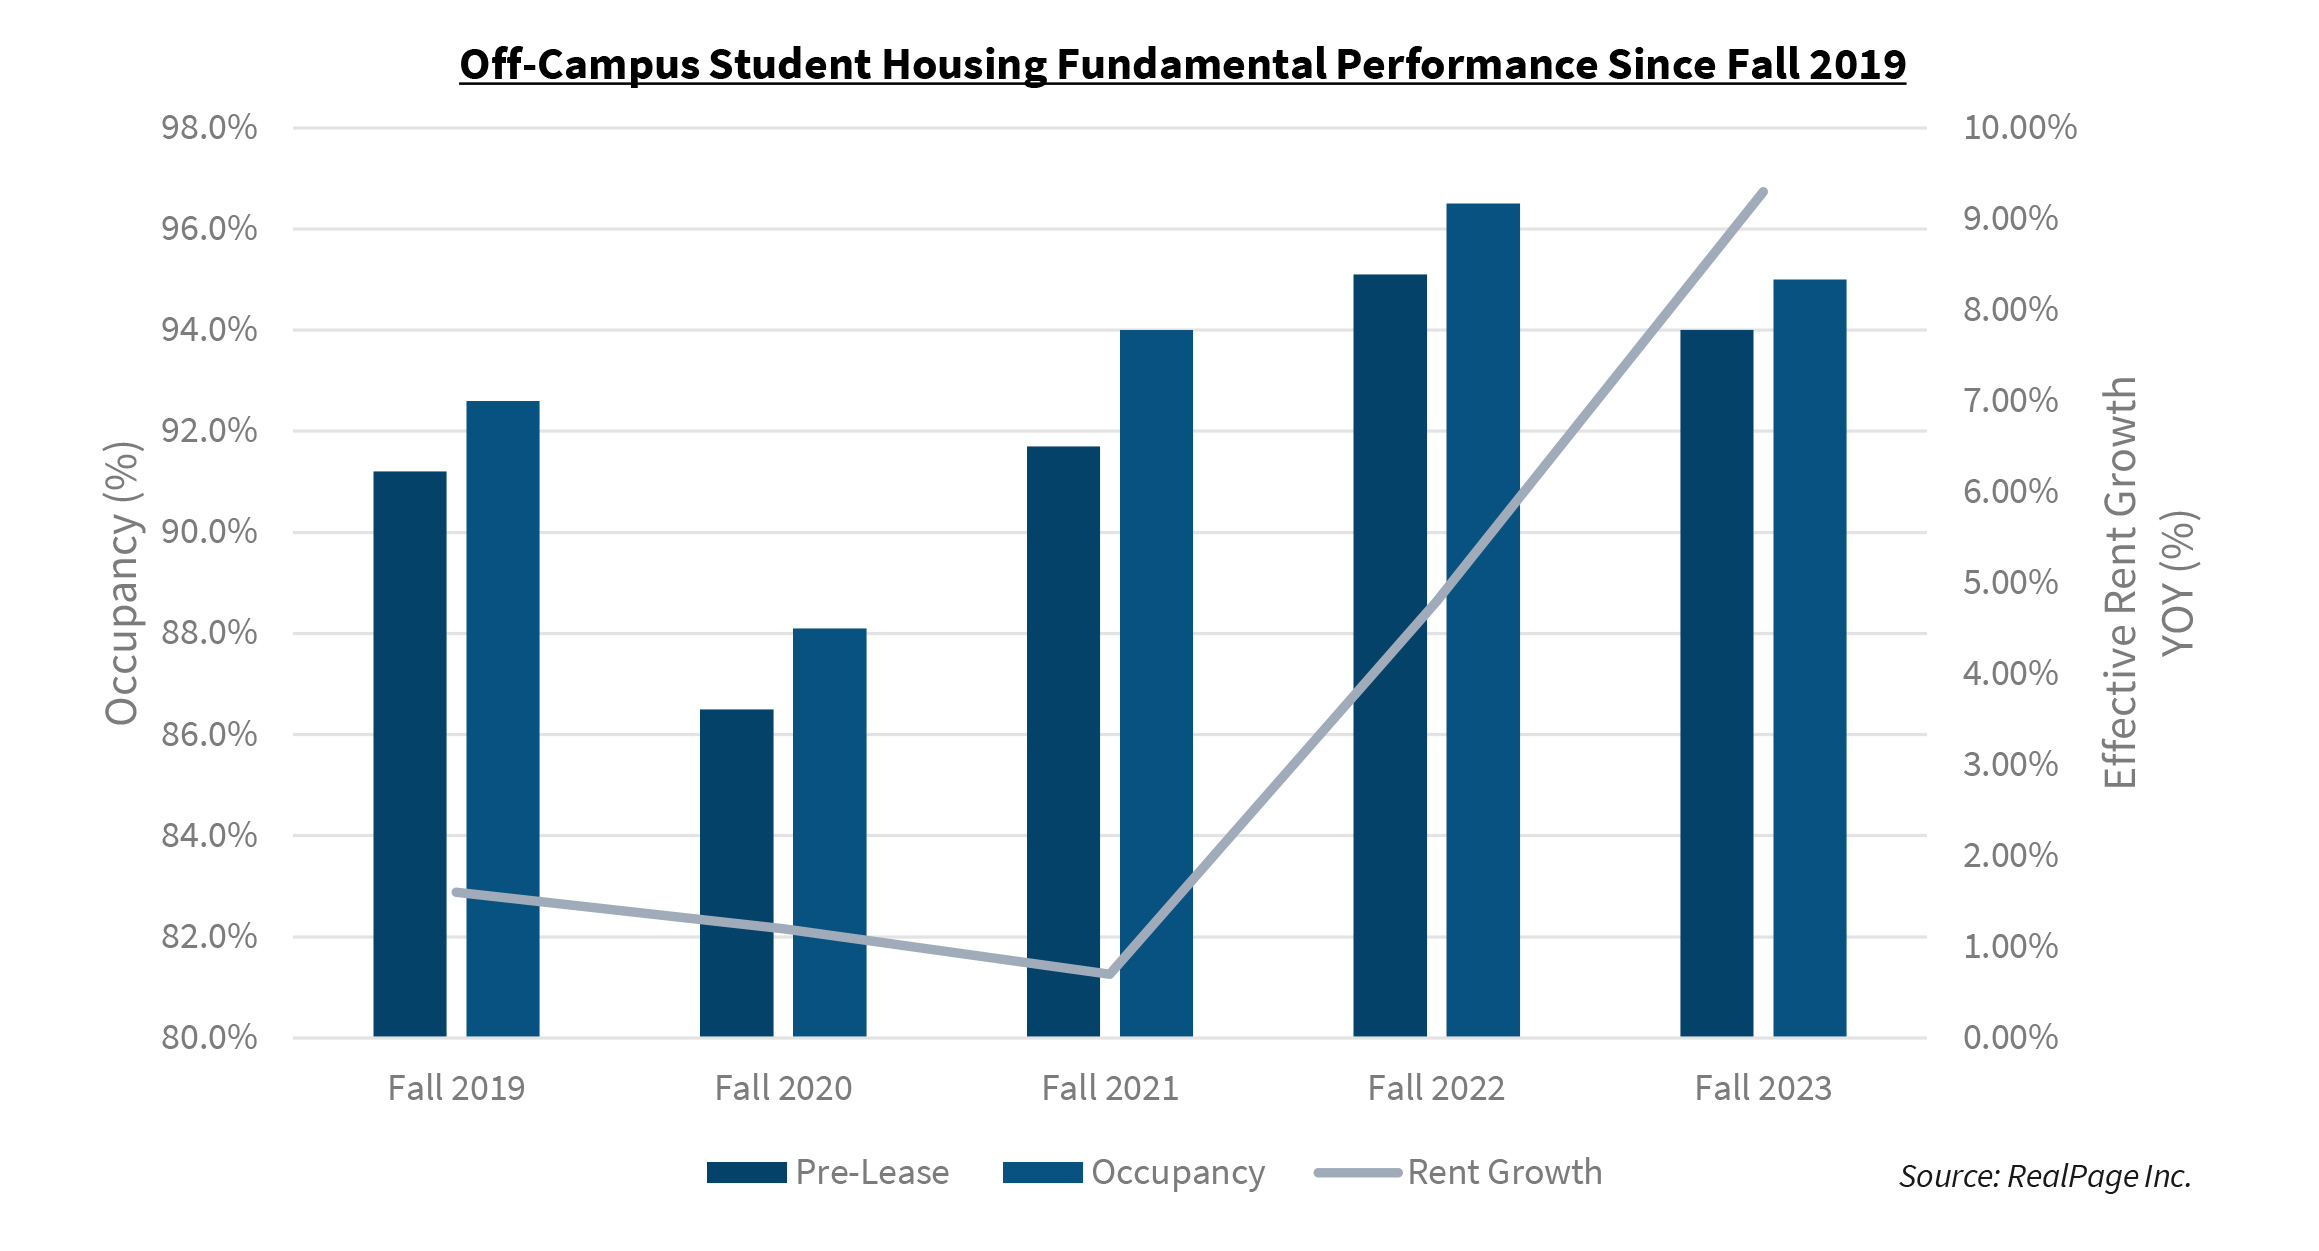 Off-Campus Student Housing Fundamental Performance Since Fall 2019